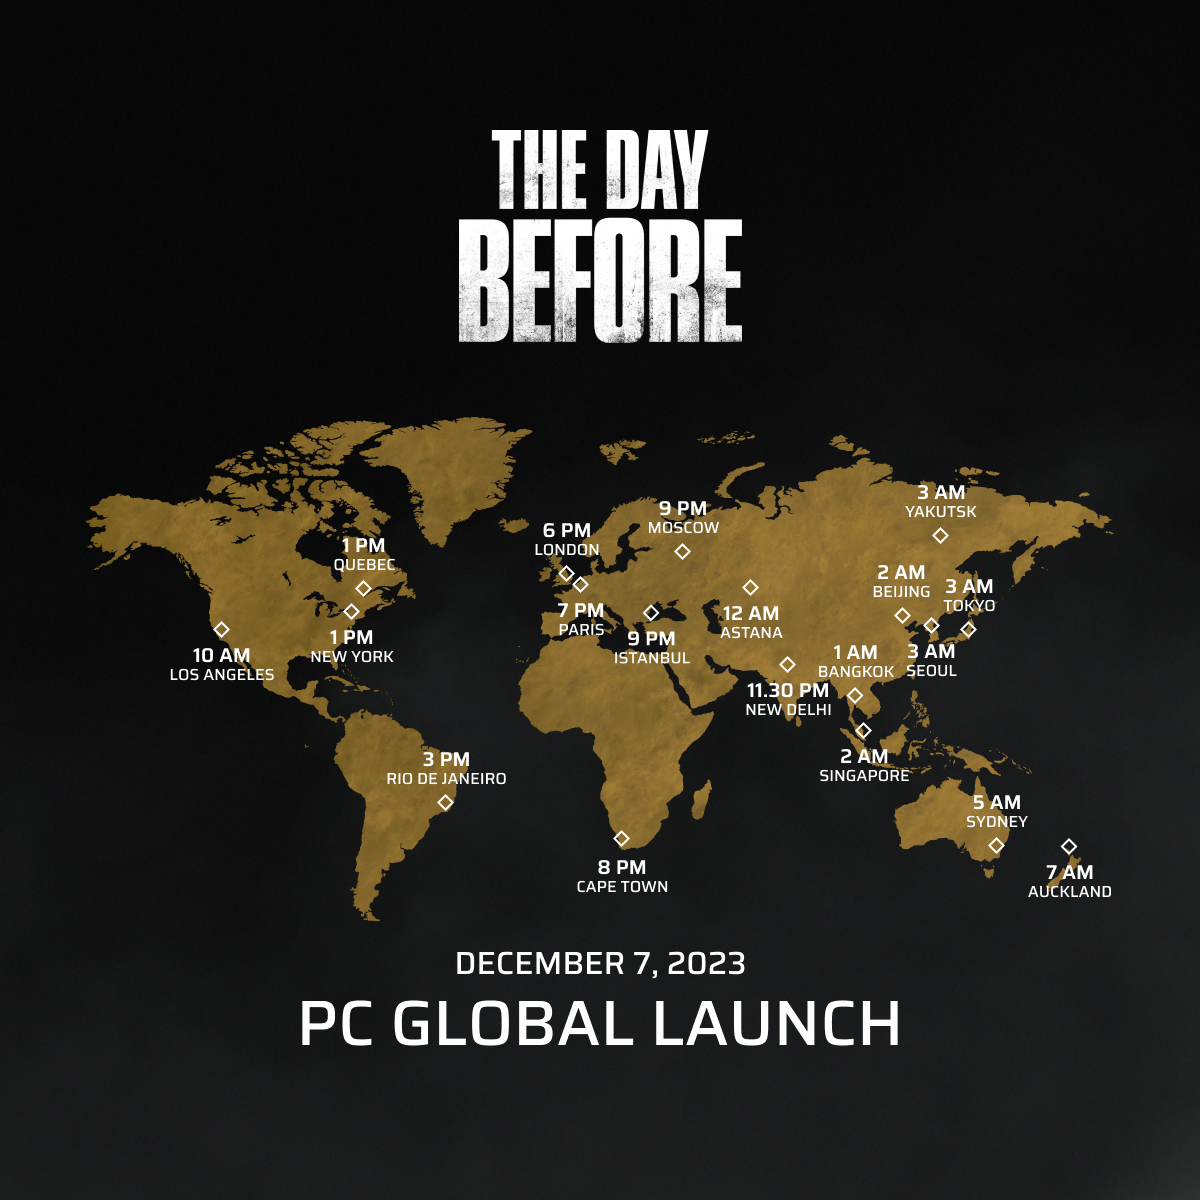 Survival MMO The Day Before Lets You Explore A Post-Pandemic USA